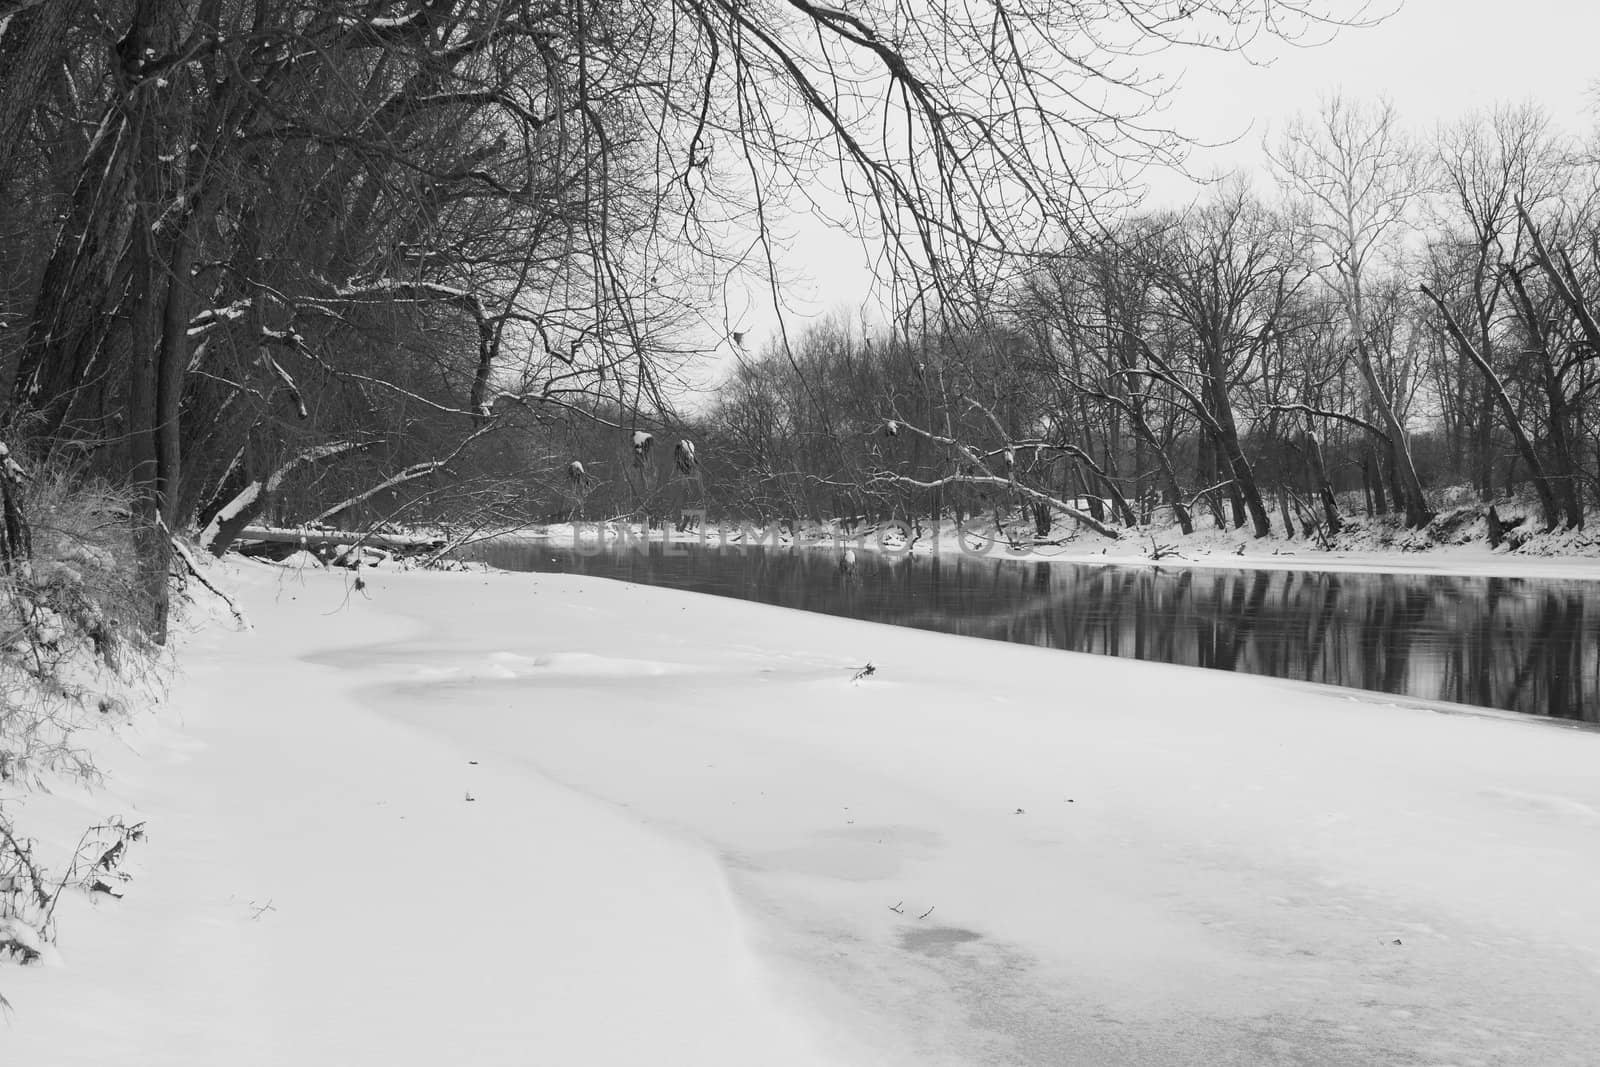 A half frozen river in black and white.